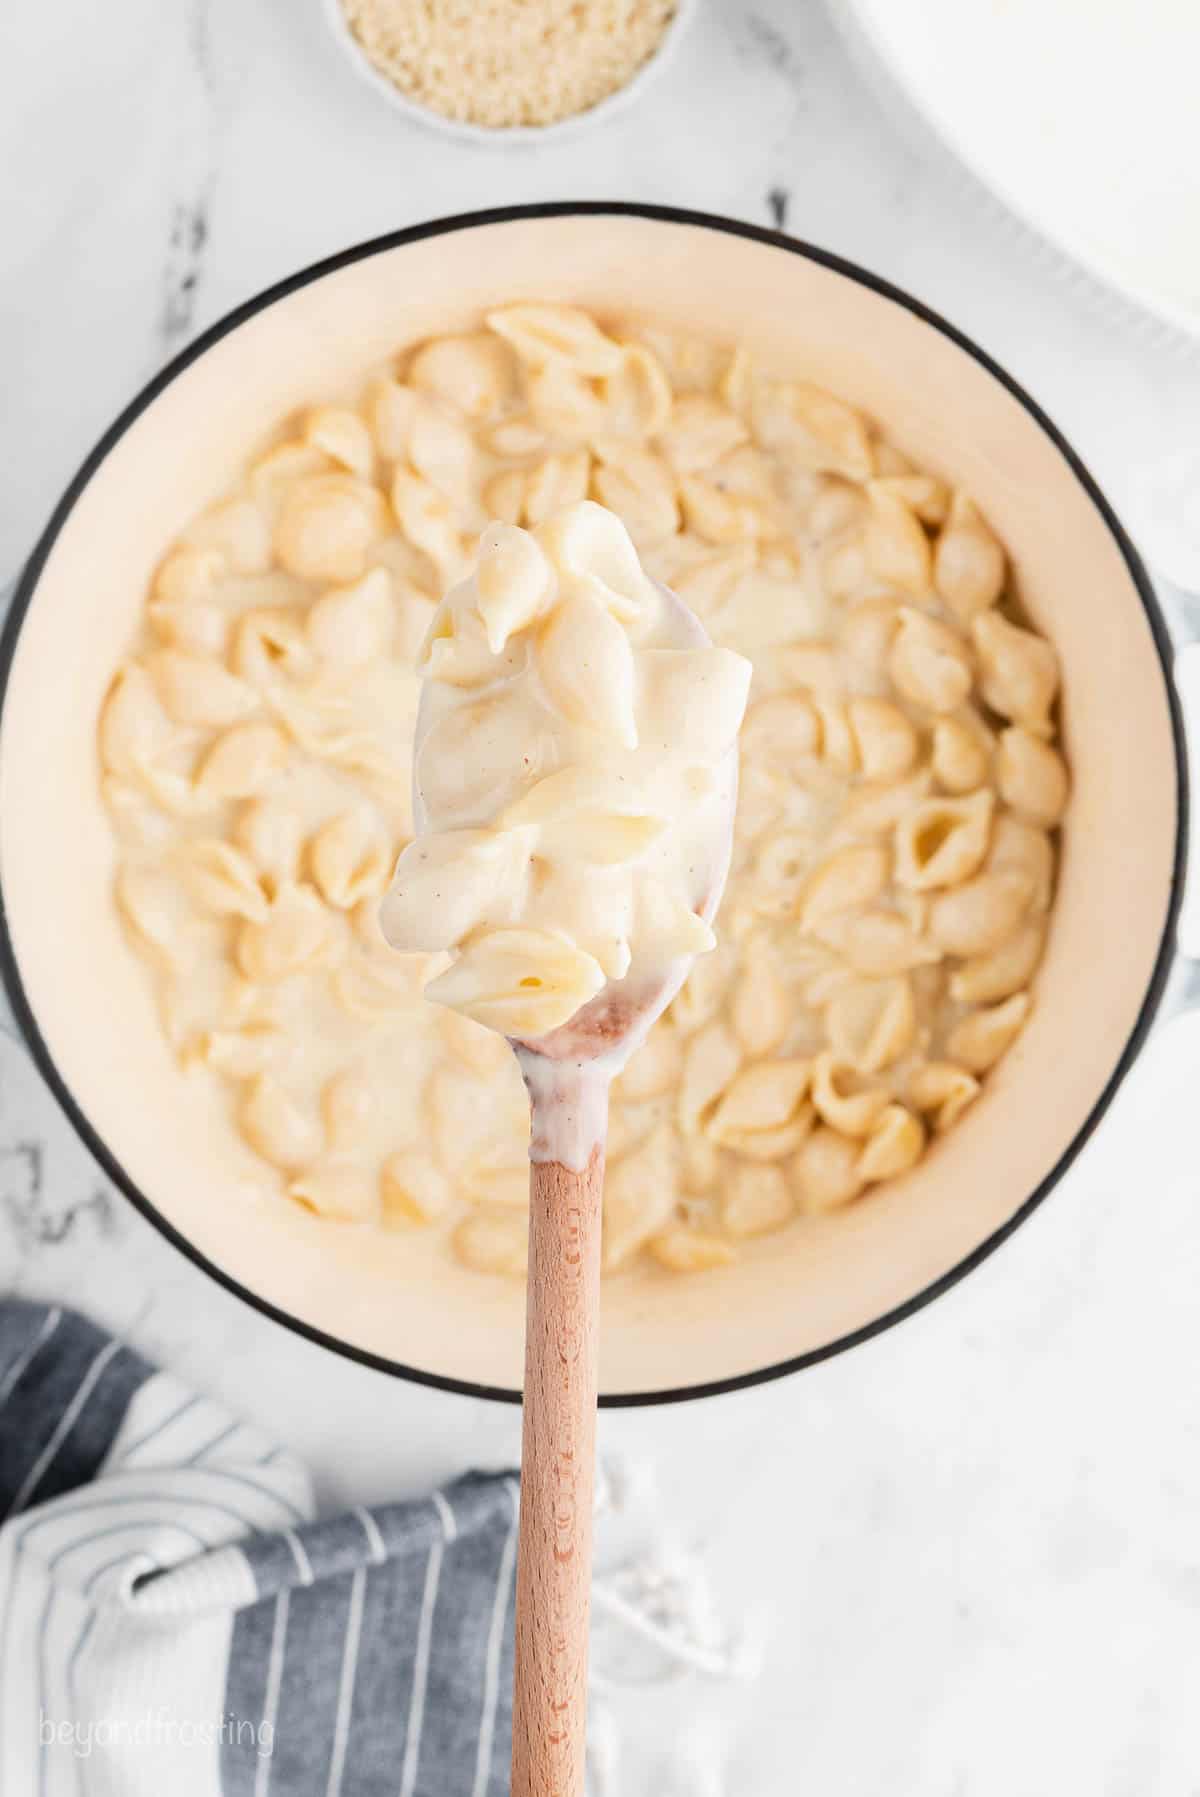 A wooden spoon mixing cheese sauce and pasta shells